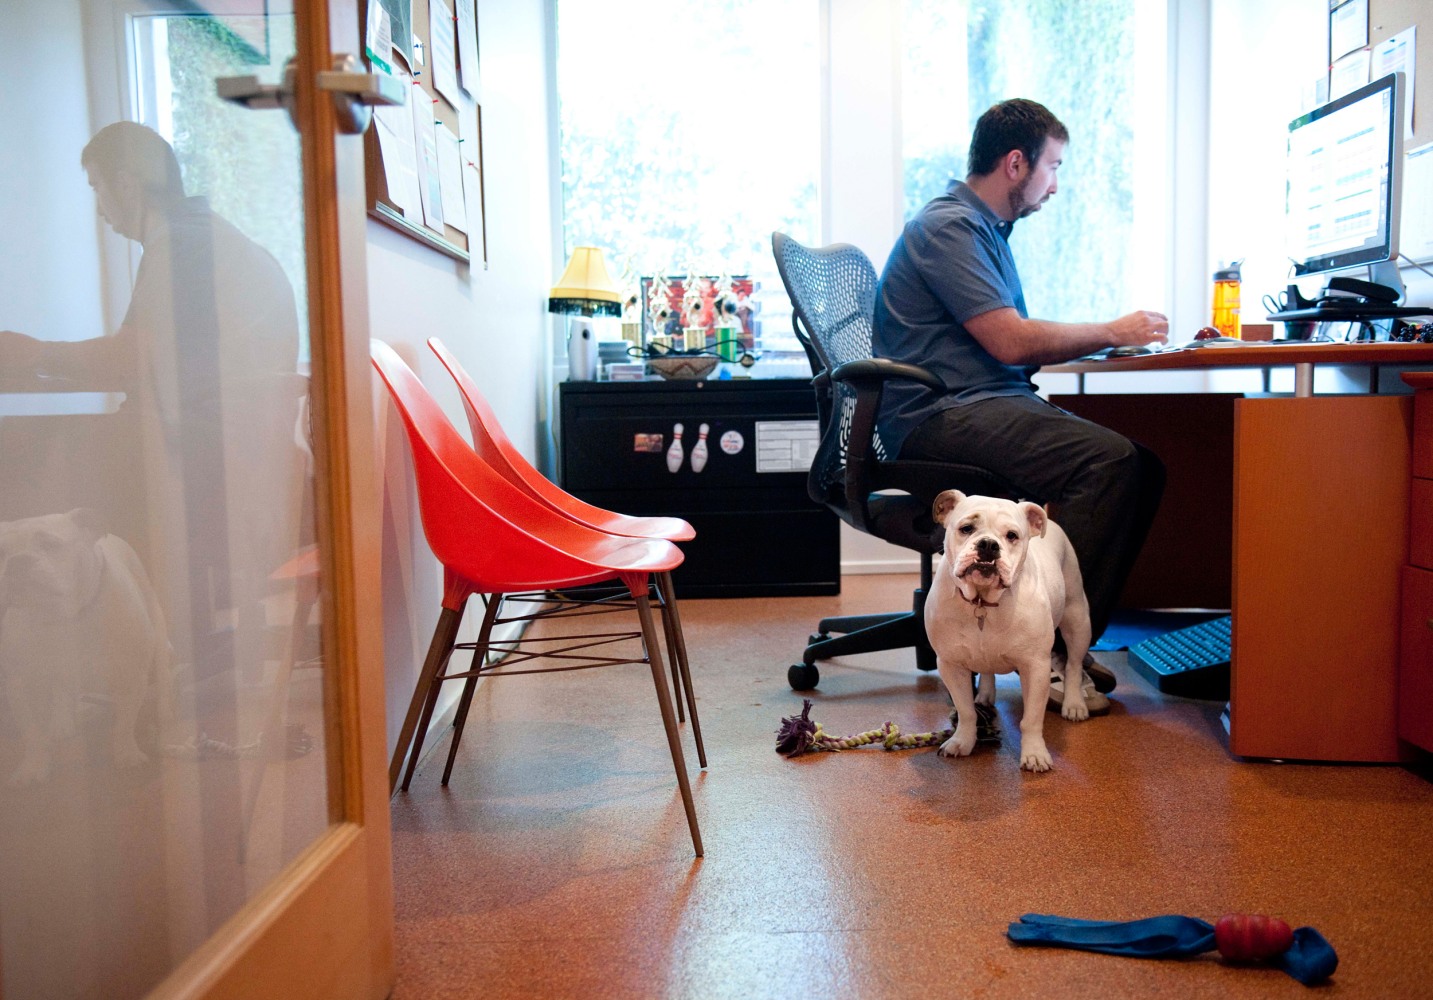 Pooch Perk: More Companies Embracing Pet-Friendly Office Policy - NBC News1433 x 1000